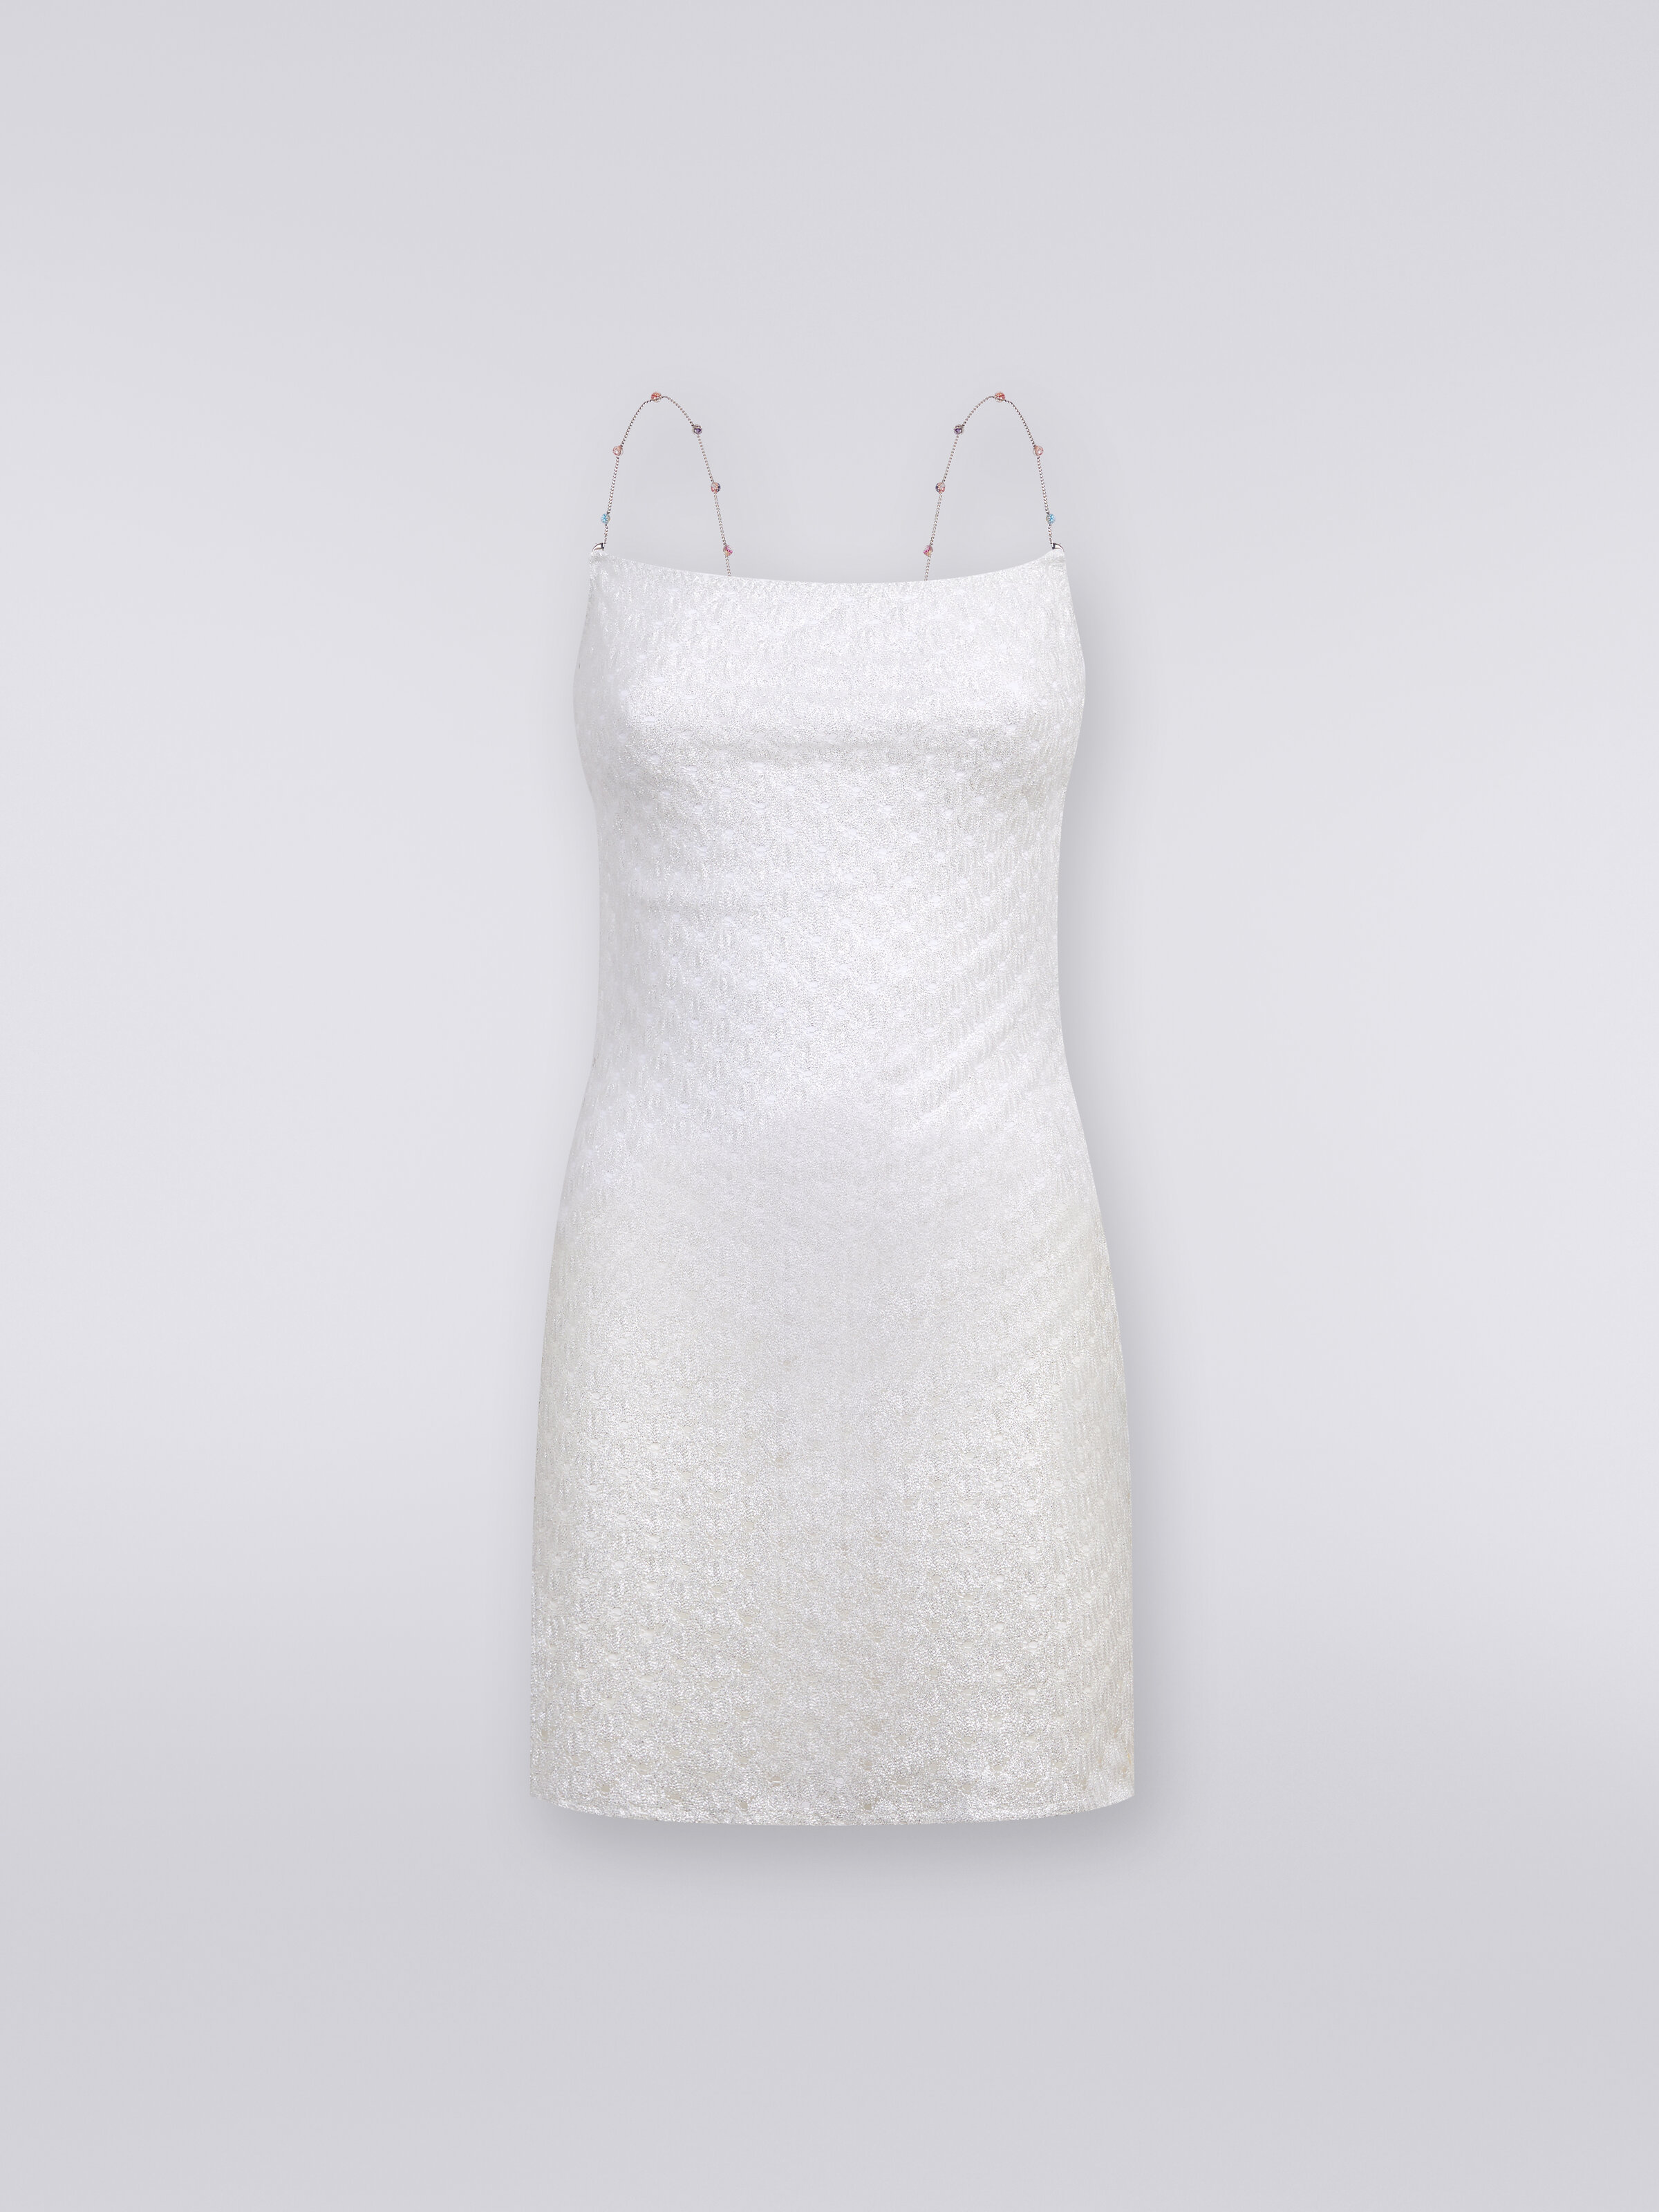 Lace-effect cover up dress with chain and gem straps, White  - 0